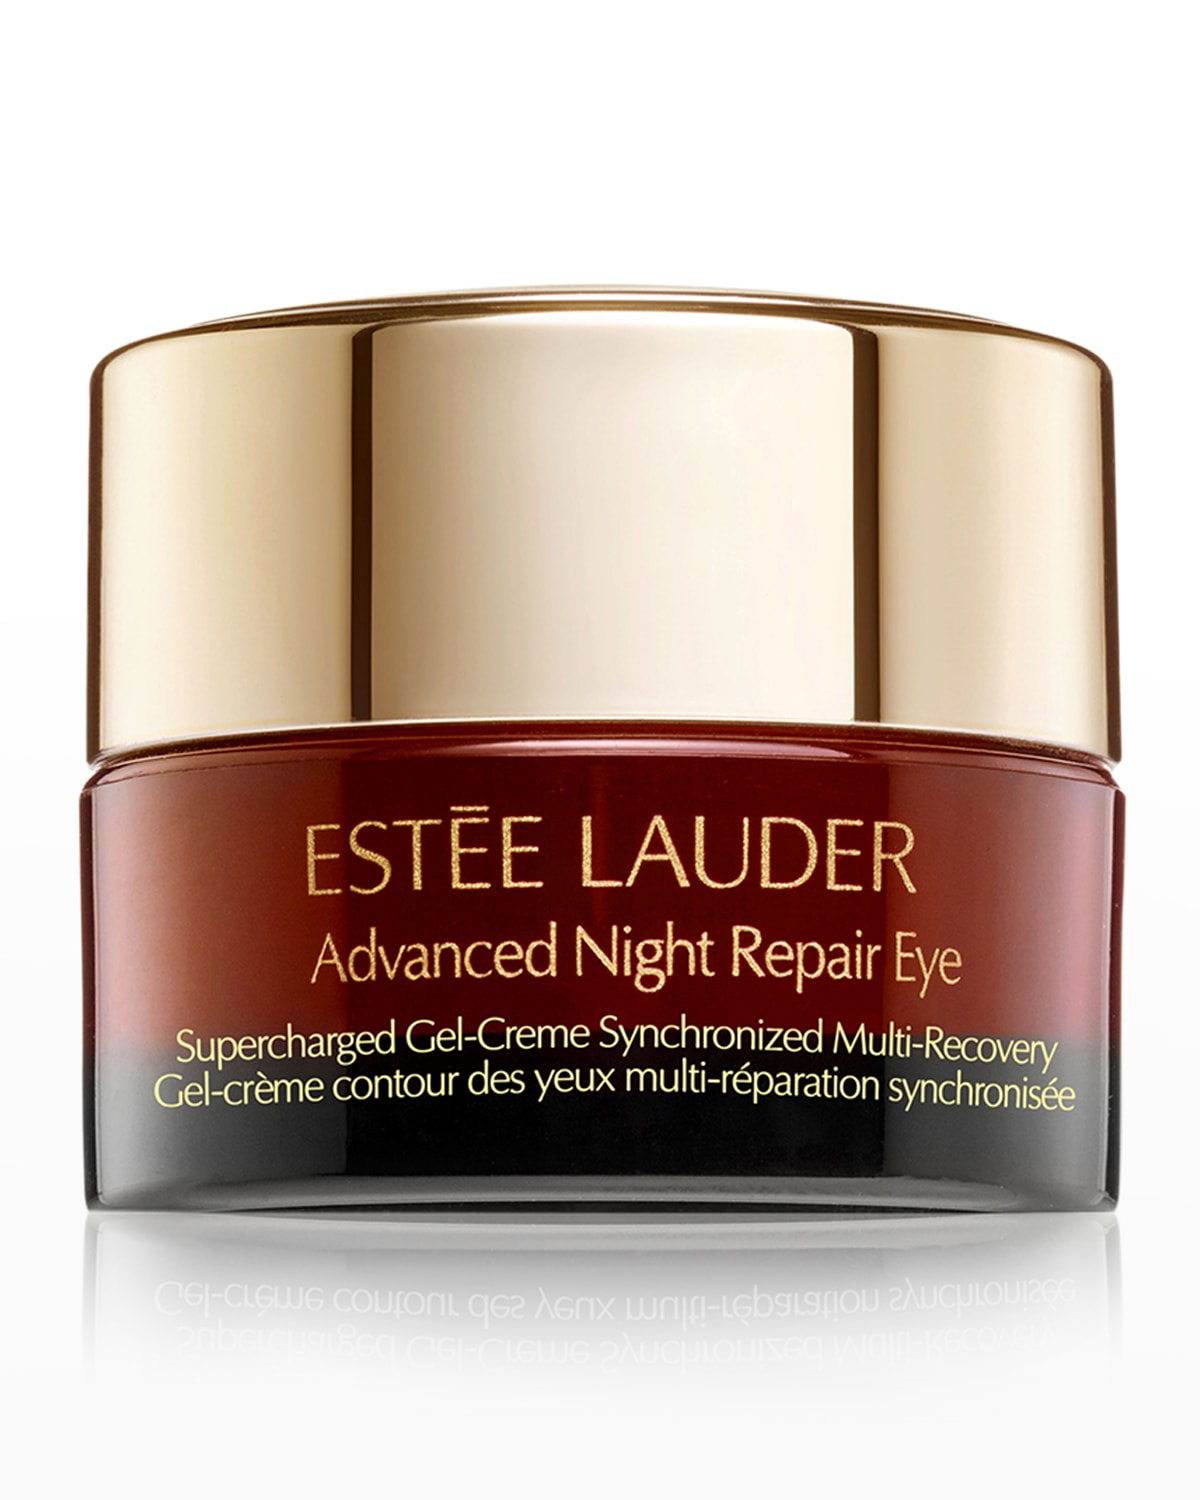 Advanced Night Repair Supercharged Eye Gel-Creme, Yours with any $50 Estee Lauder Purchase